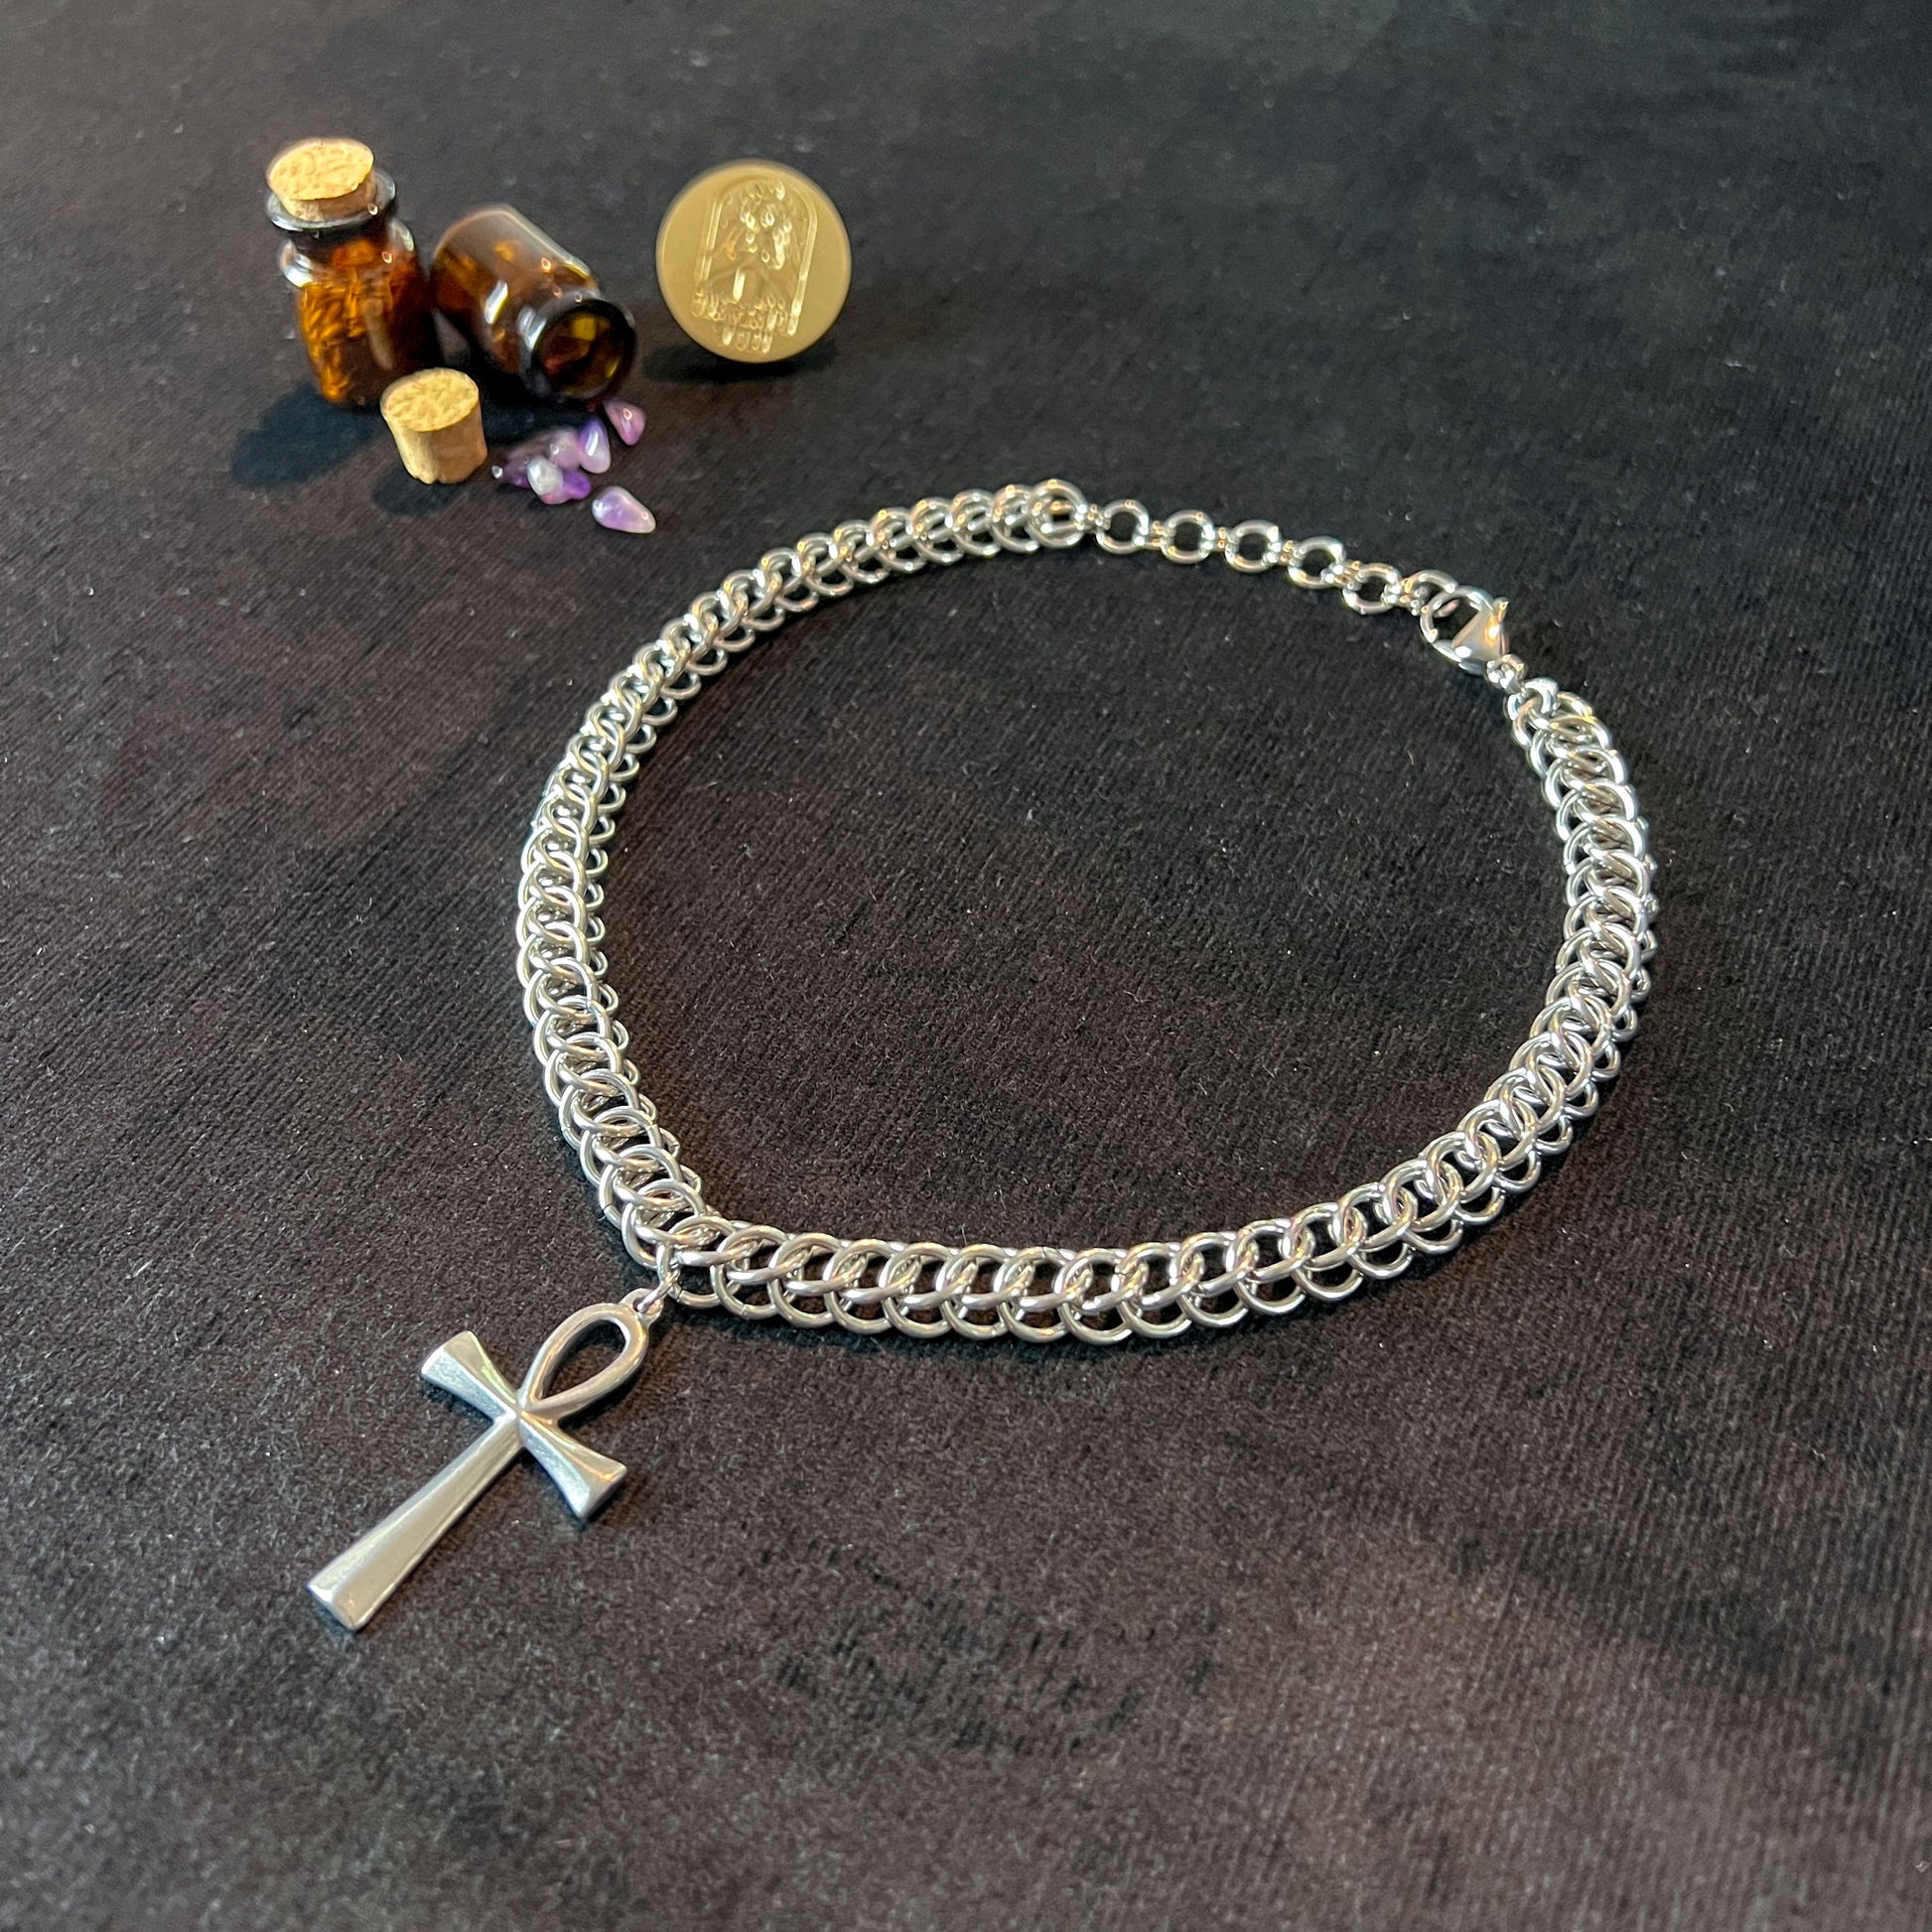 Half Persian chainmail choker with an Ankh pendant, Egyptian cross, stainless steel necklace Baguette Magick